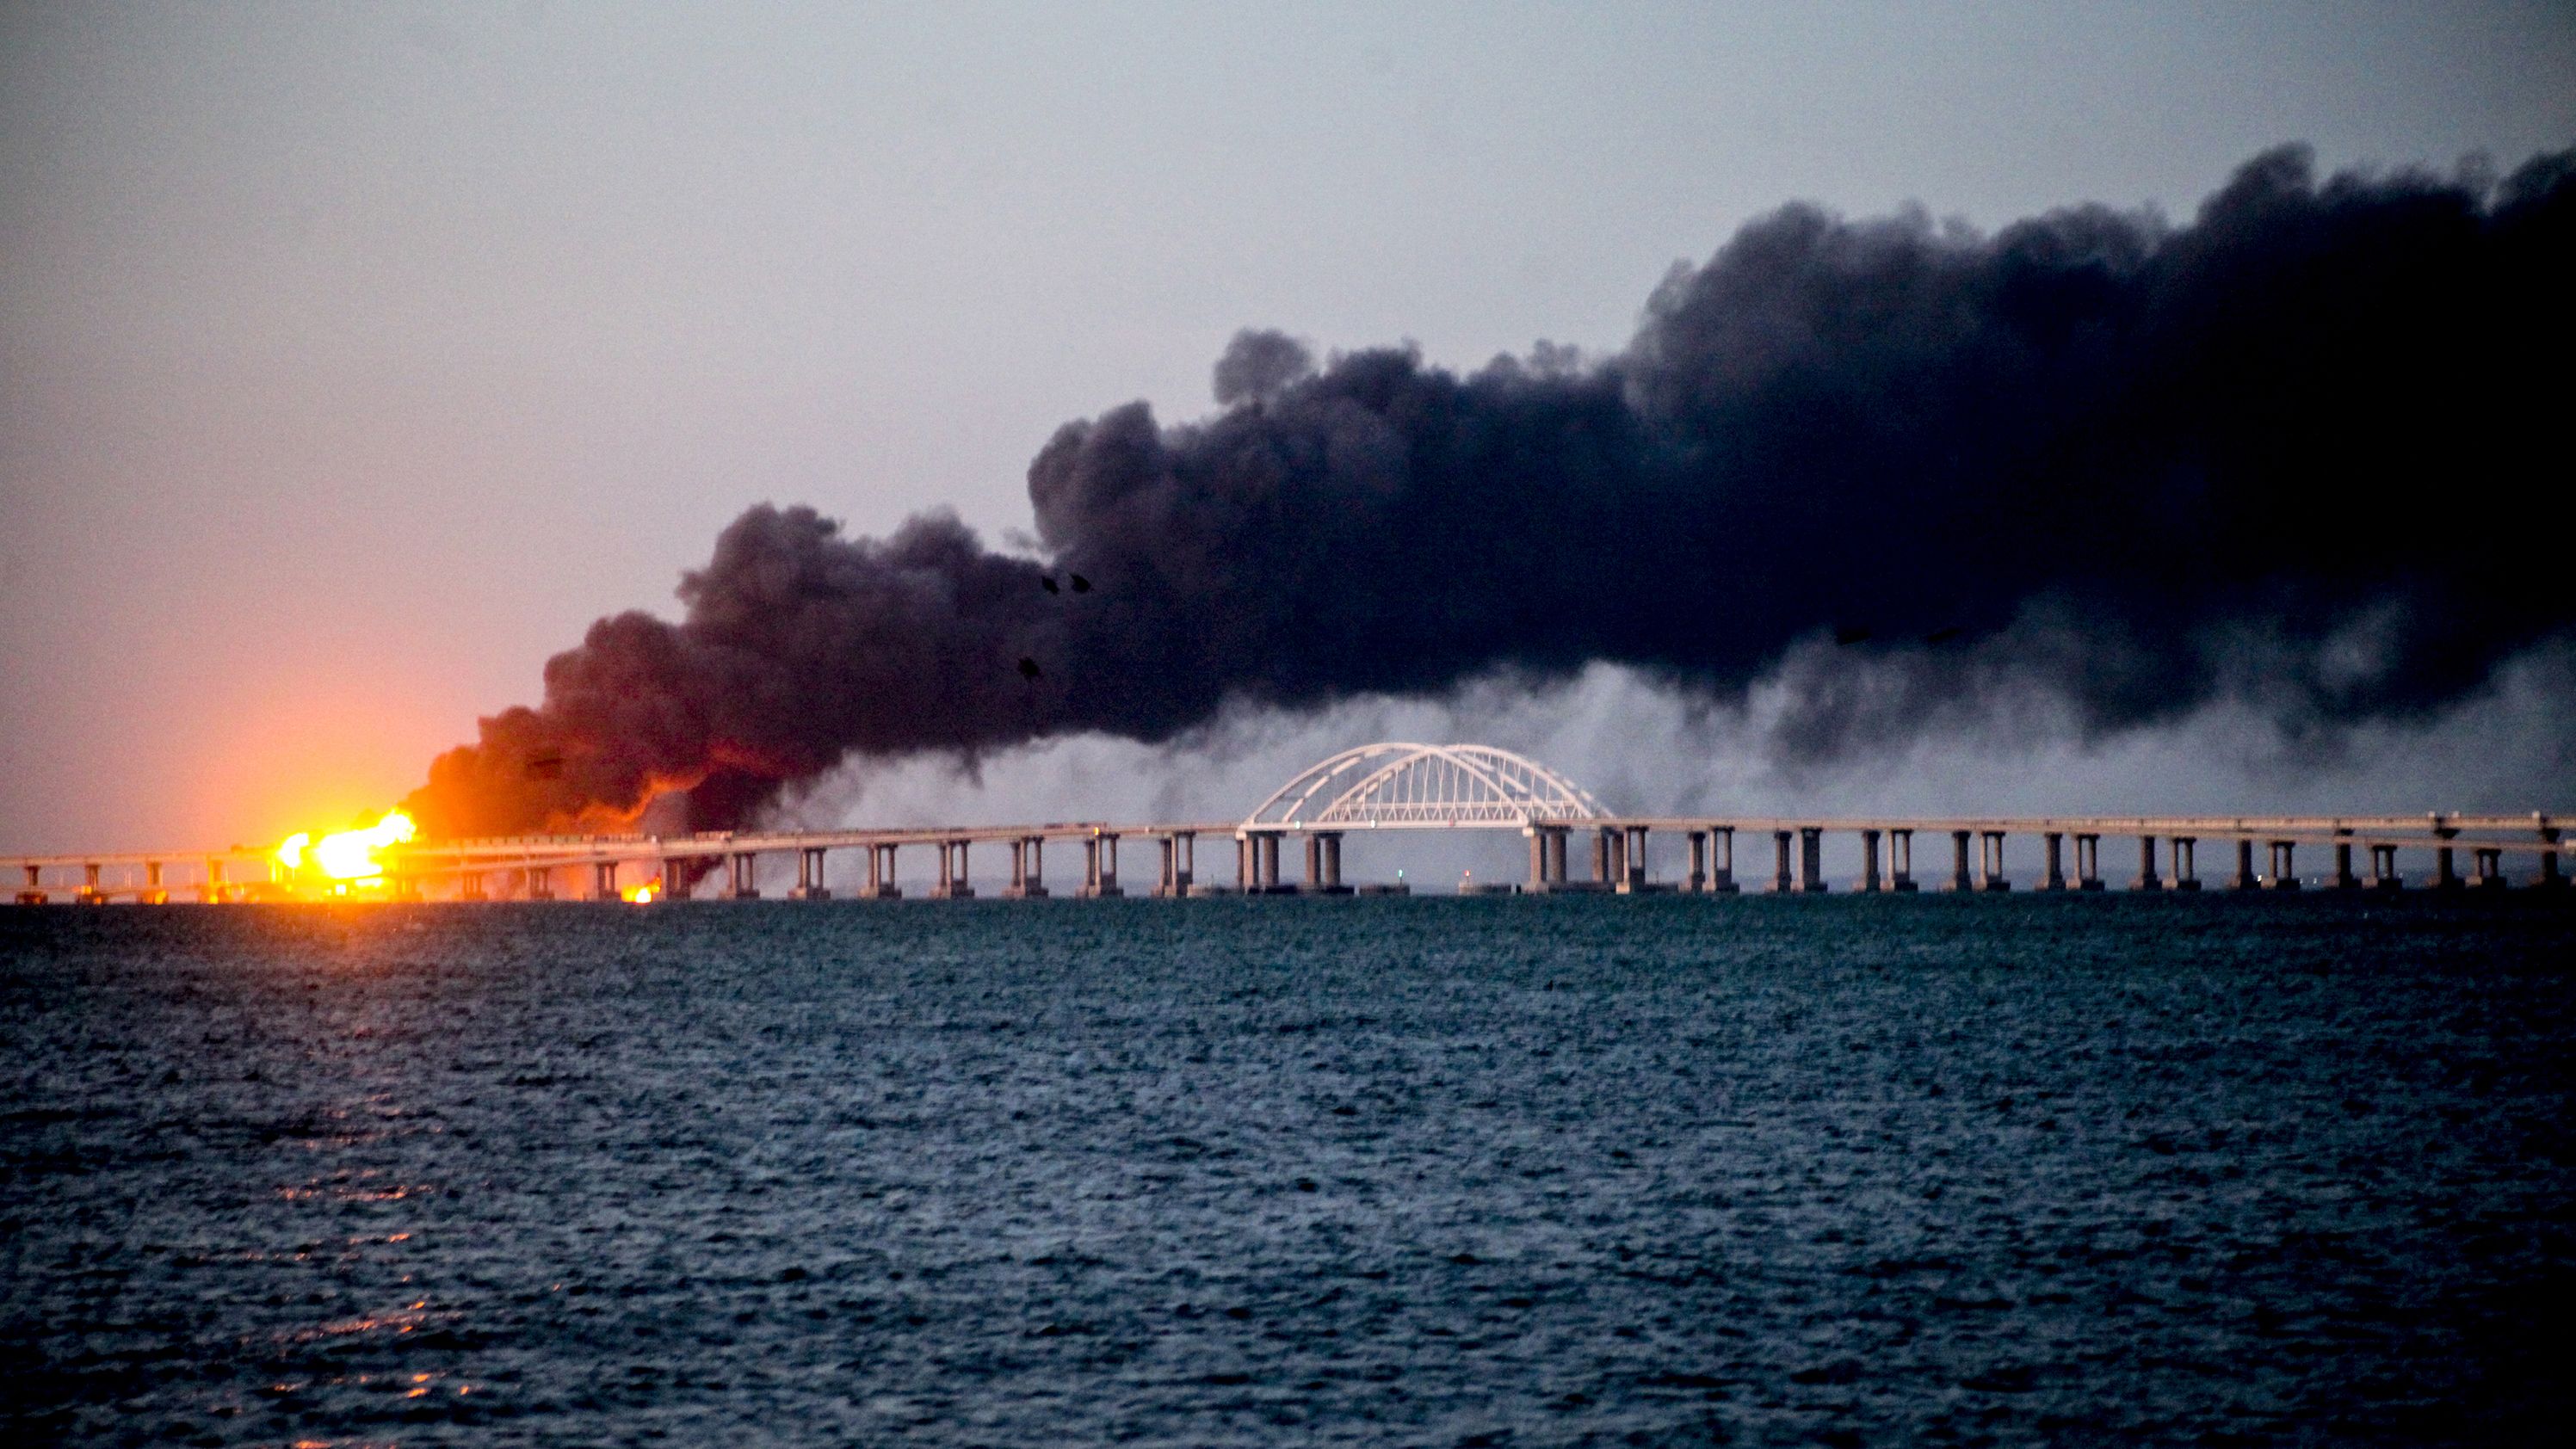 A huge blast severely damaged the only bridge connecting annexed Crimea to the Russian mainland on October 8. At least three people were killed in the explosion, which caused parts of Europe's longest bridge to collapse, according to Russian officials.